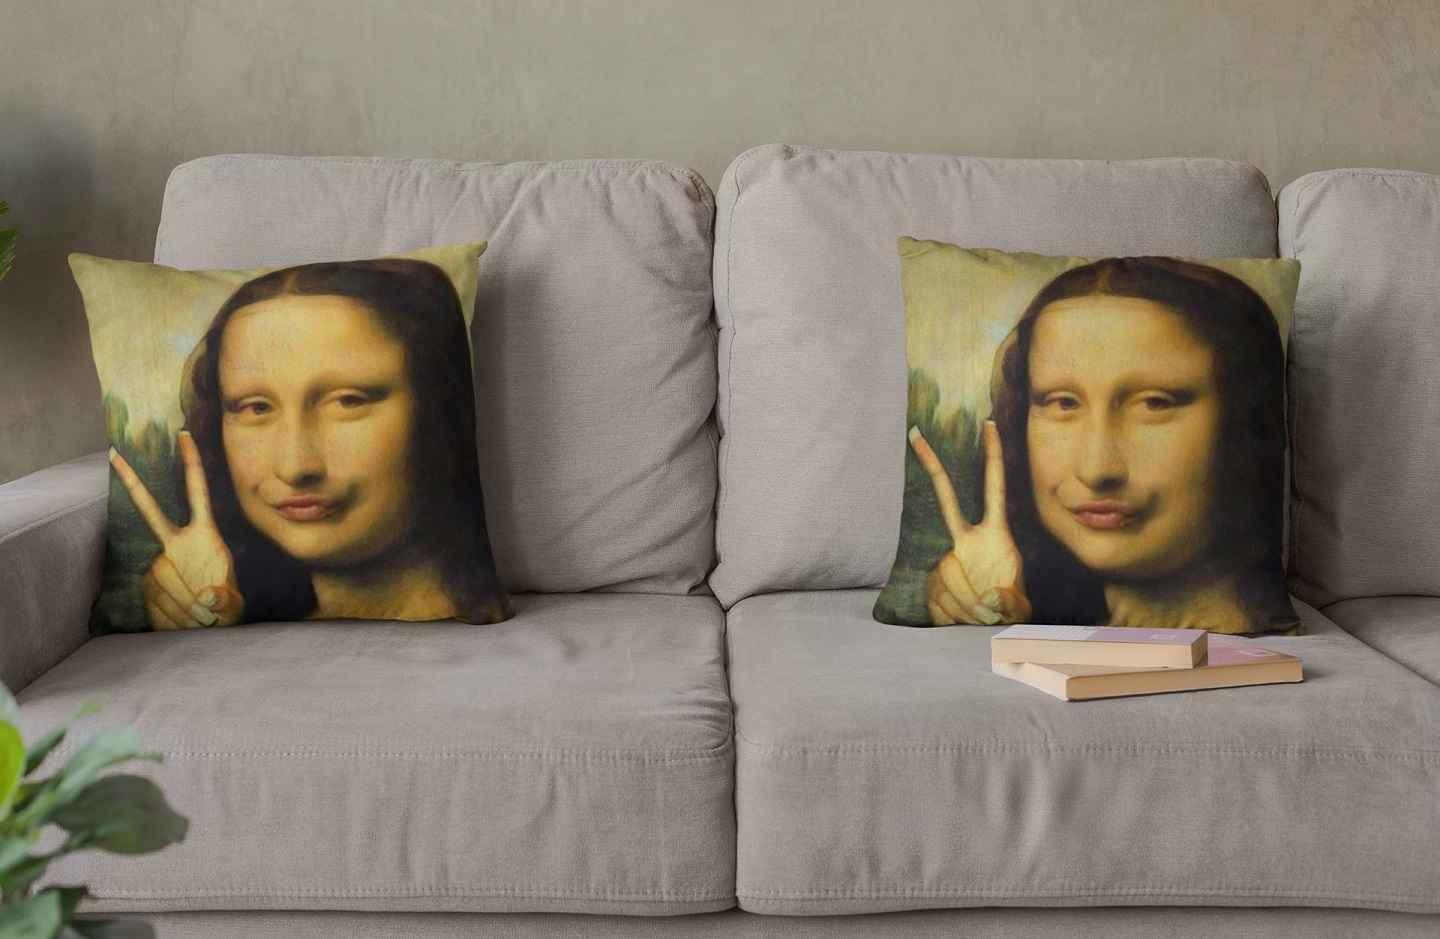 Two Mona Lisa memes positioned at opposite ends of a sofa.